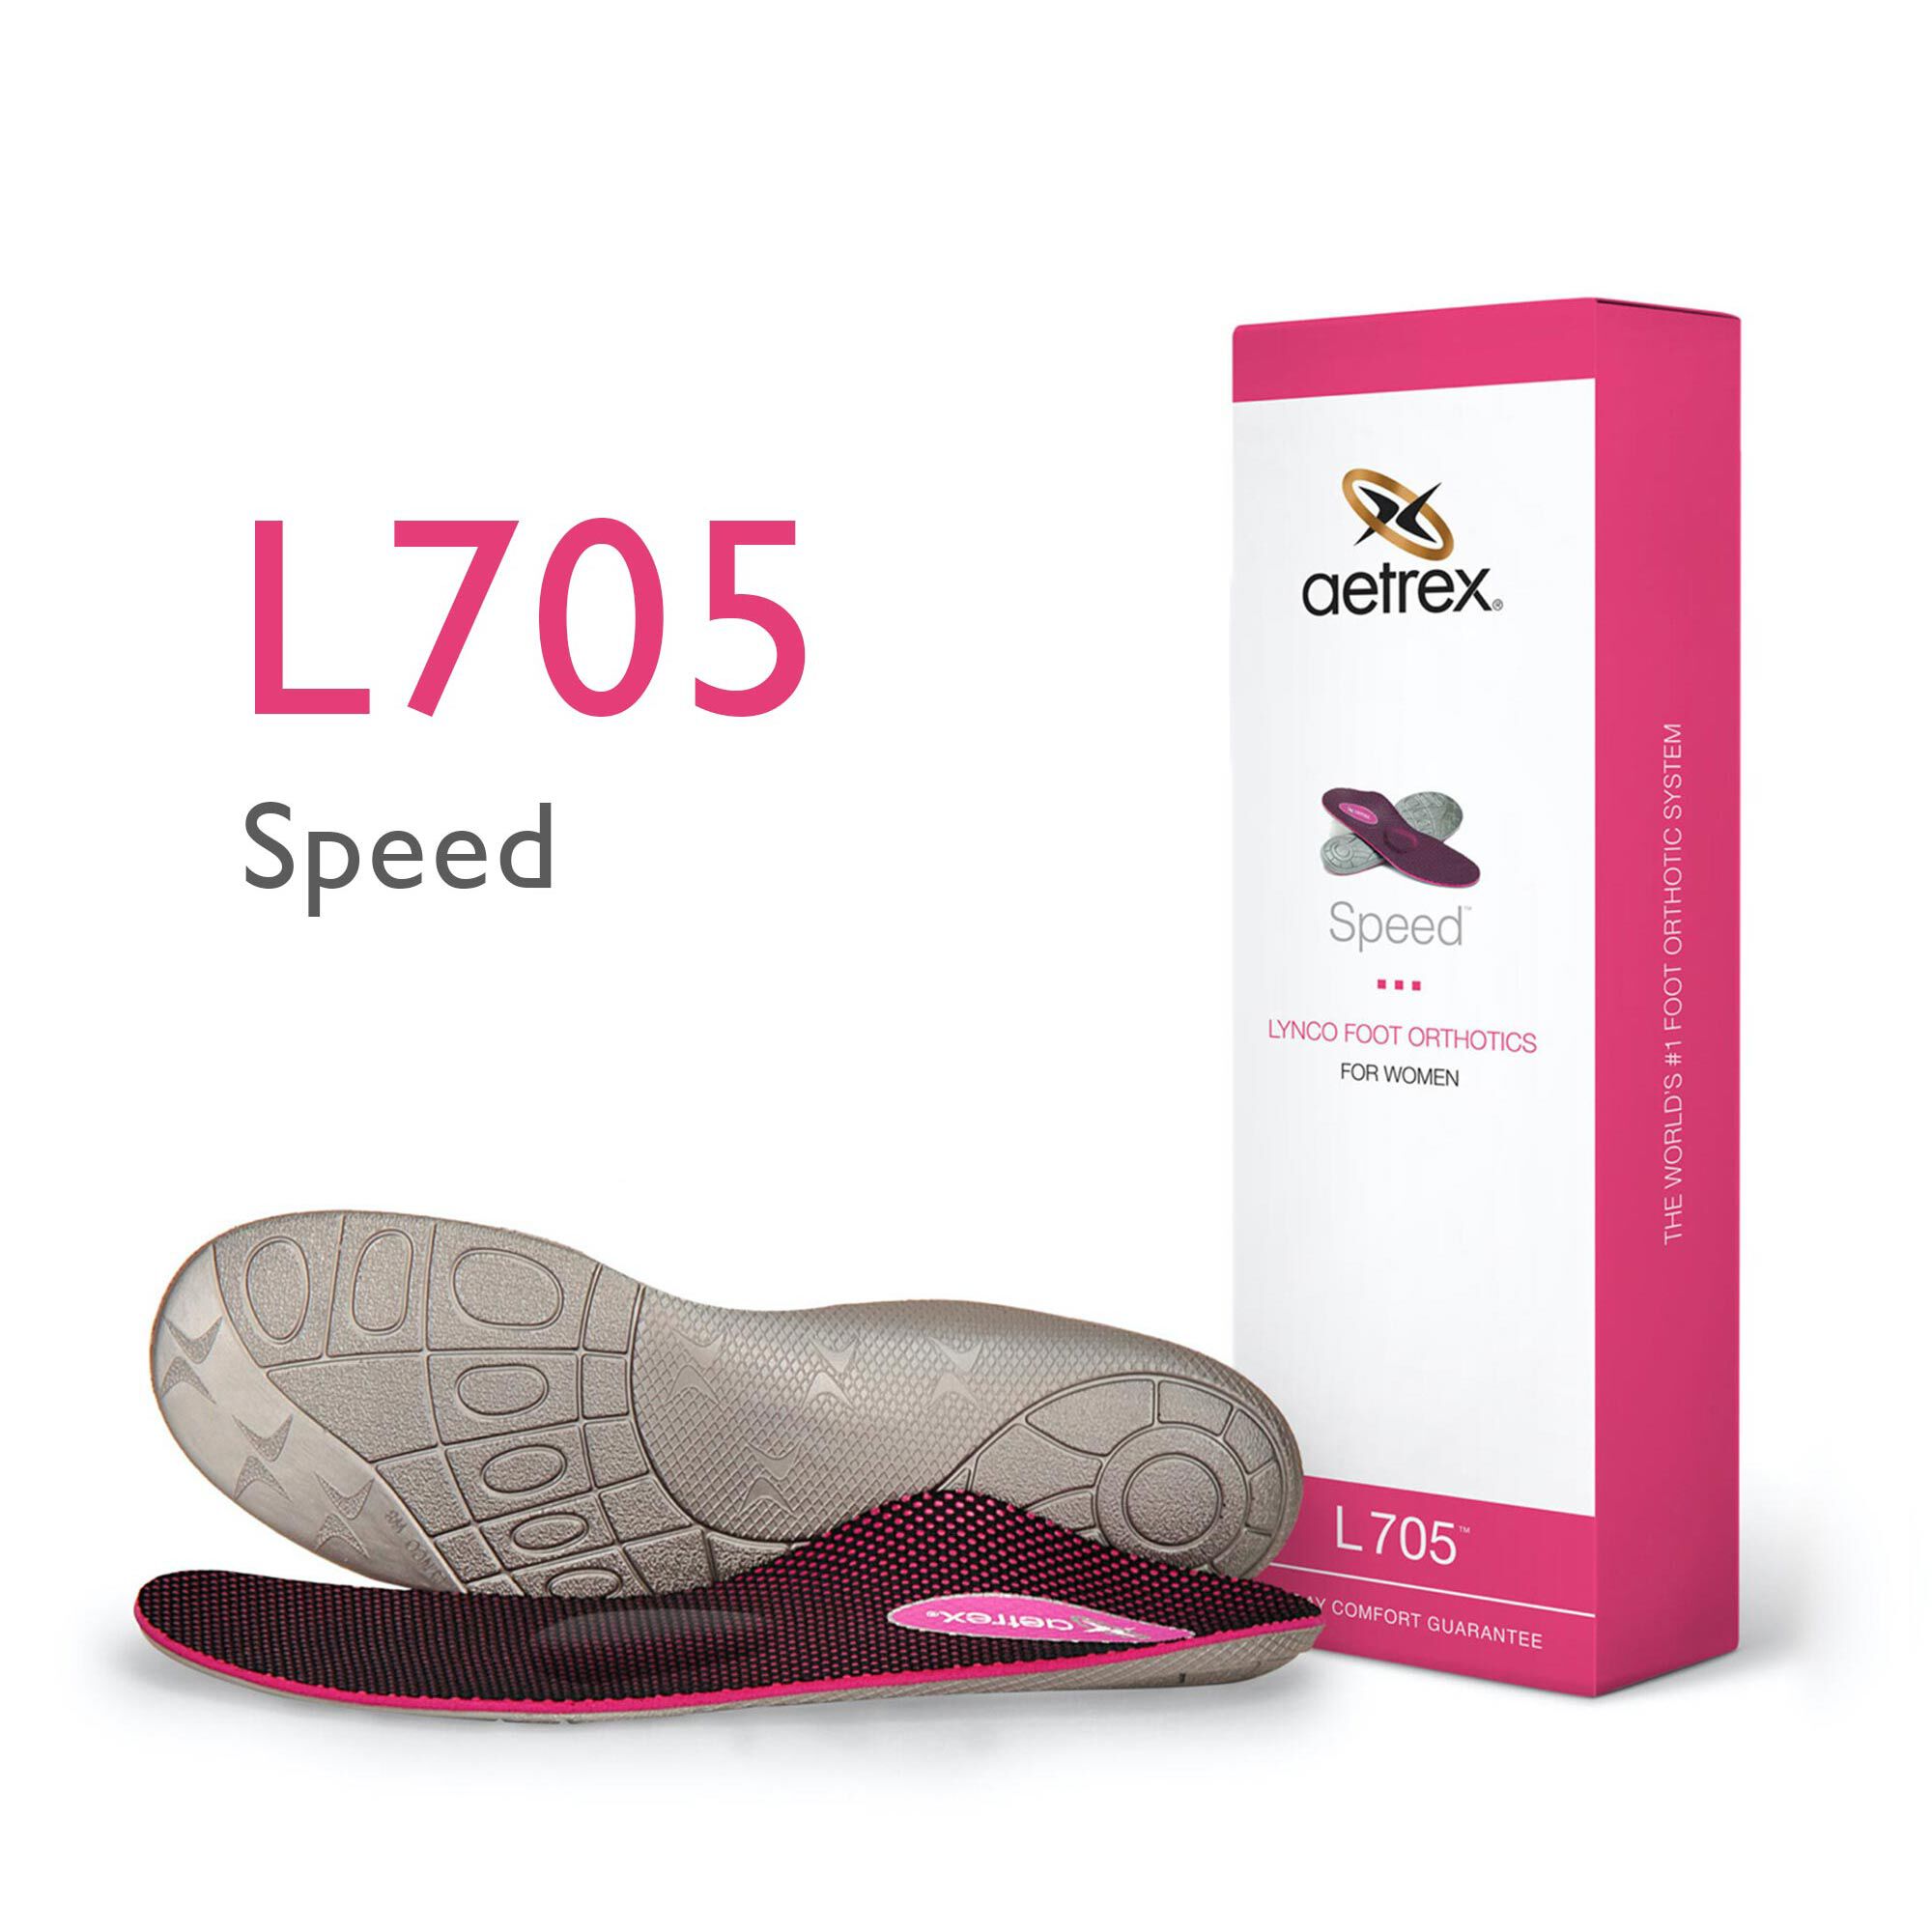 Ball-of-foot Pain Insoles For Running Shoes | Women's Speed Orthotics